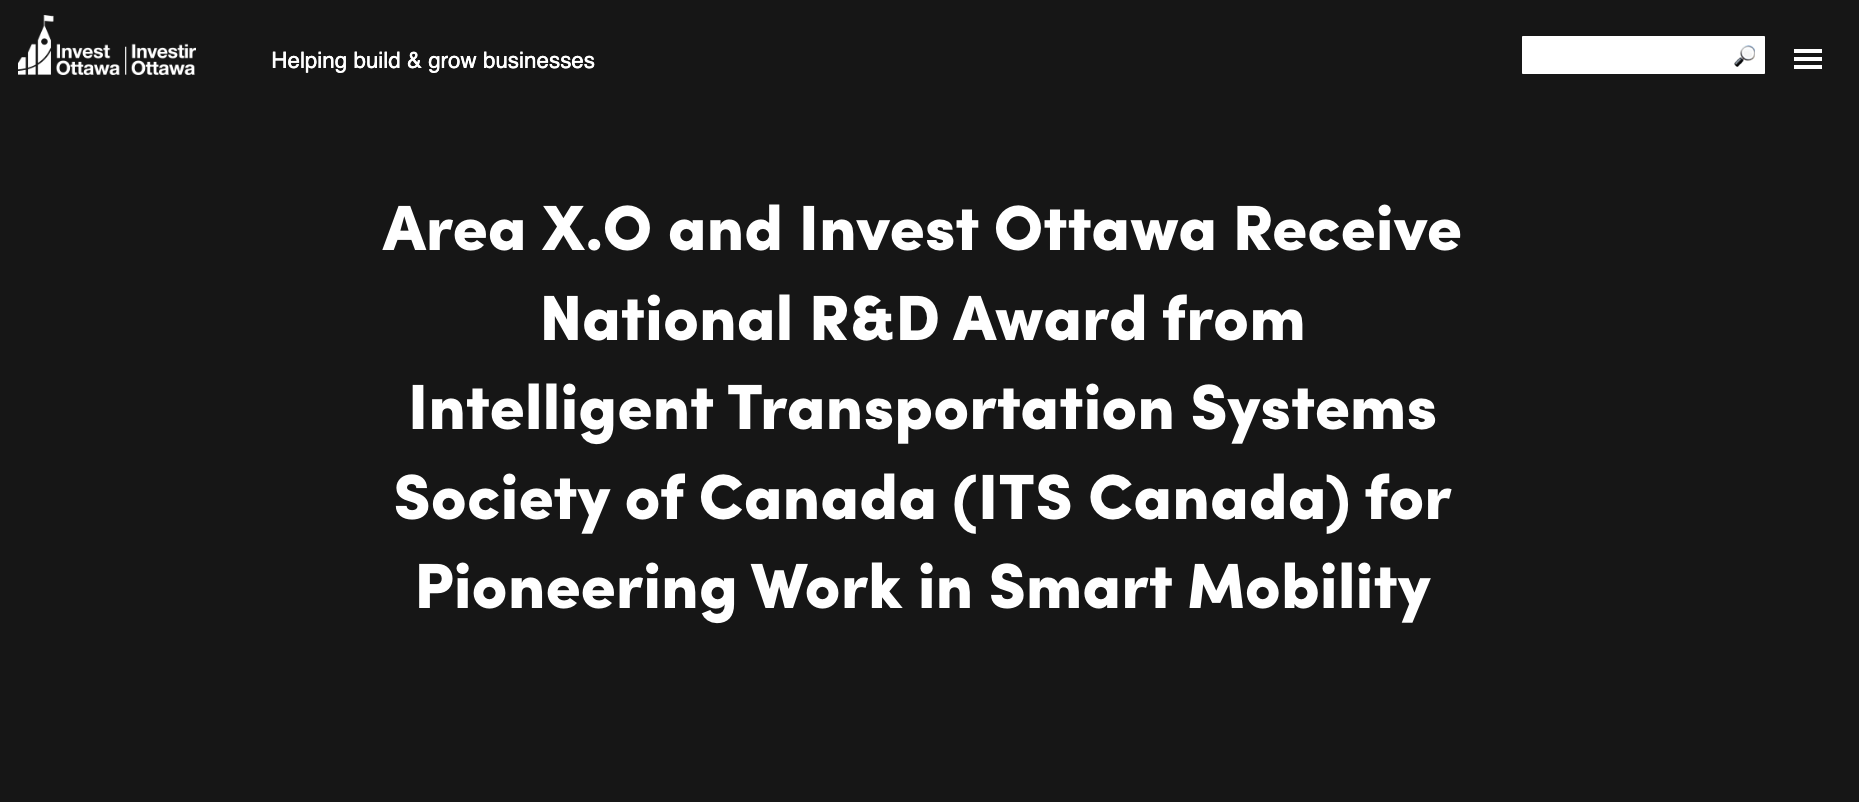 Area X.O and Invest Ottawa Receive National R&D Award from Intelligent